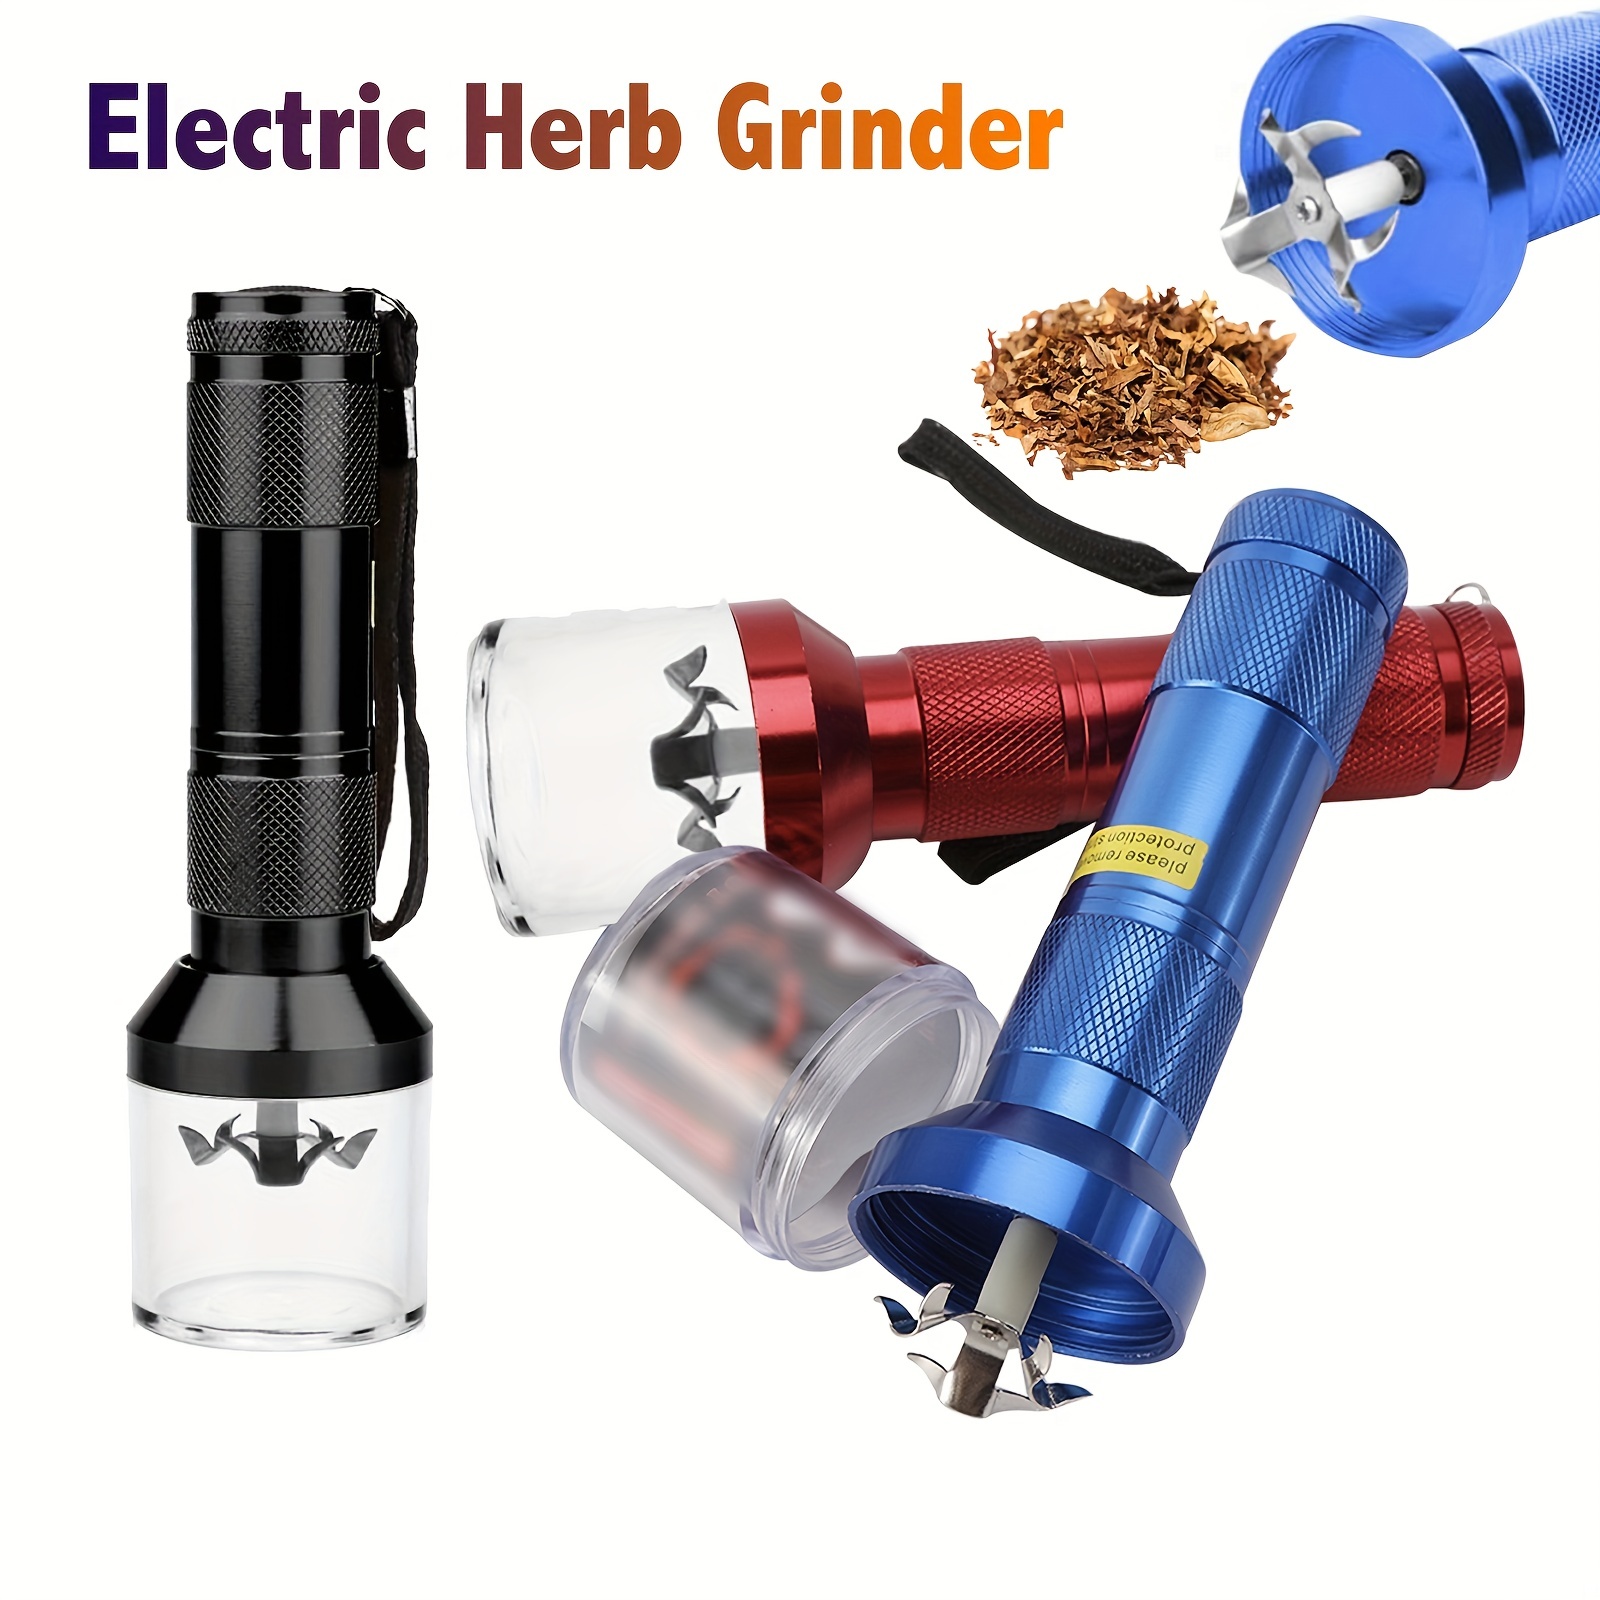 Portable Stainless Steel Glass Electric Herb Grinder - MUXIANG